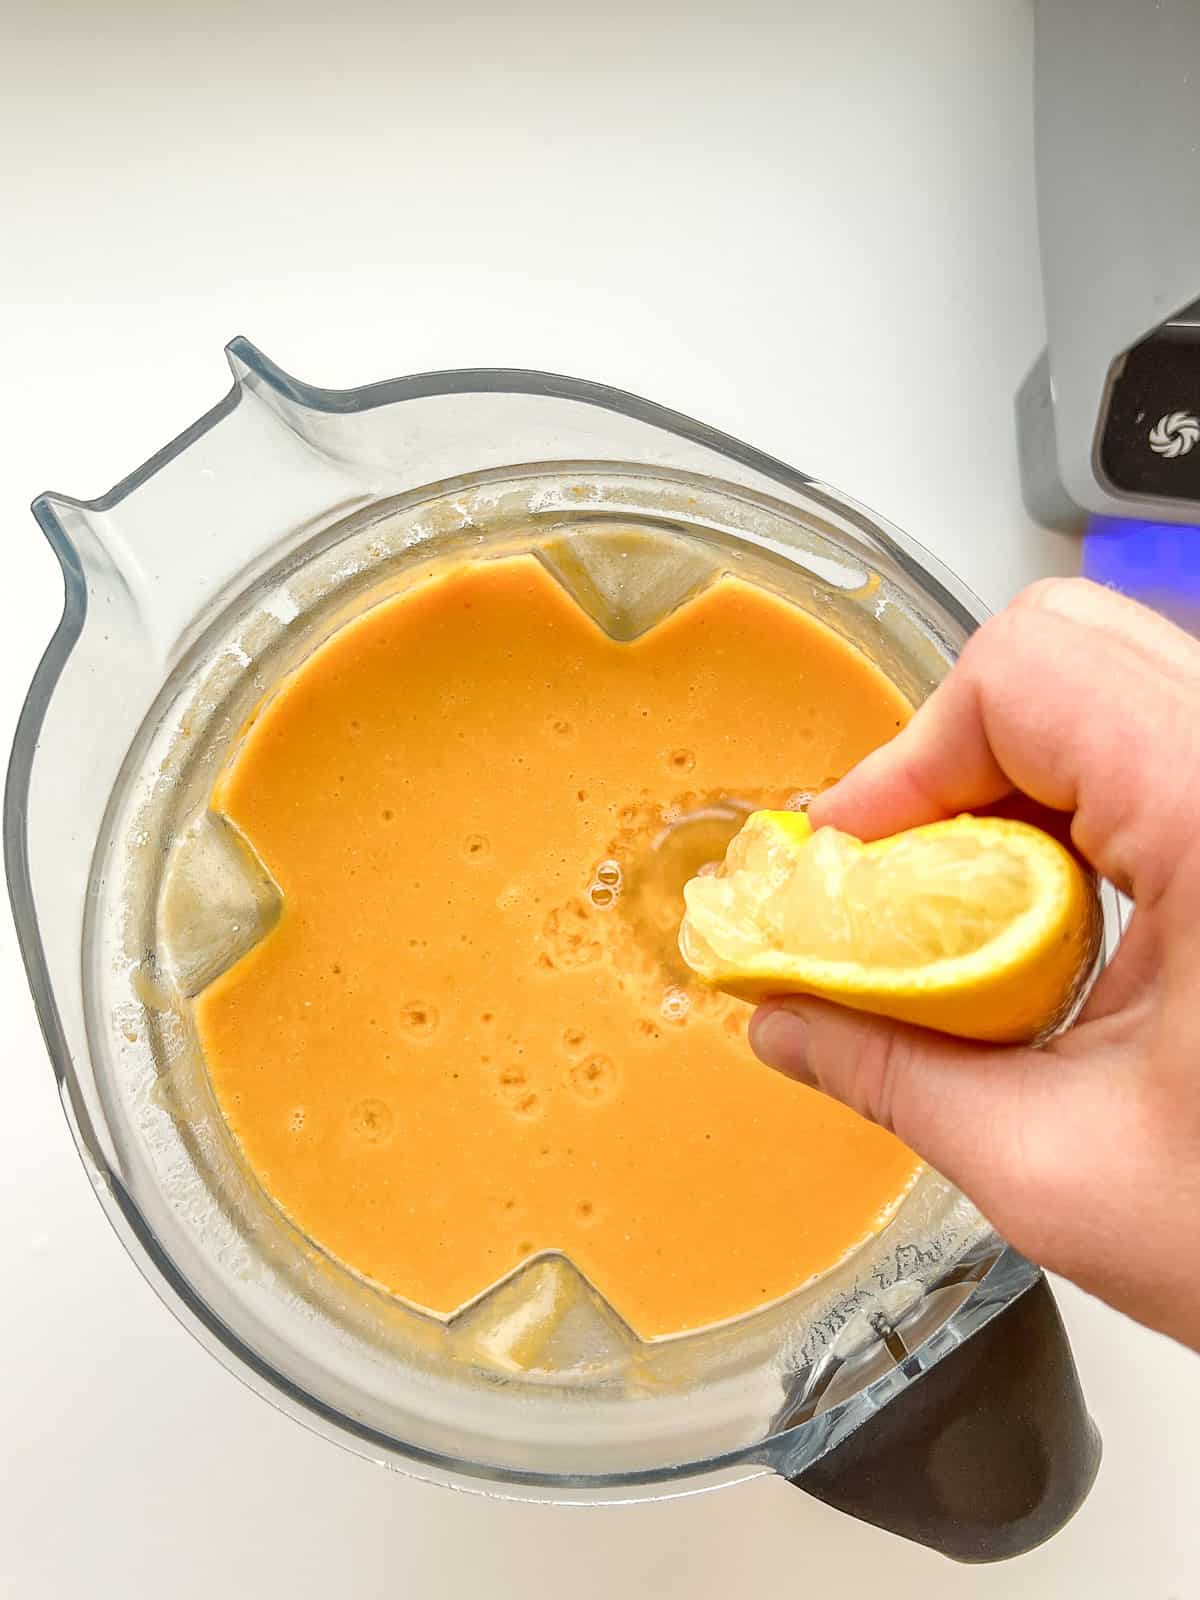 An image of lemon being squeezed into a blender full of lentil soup.